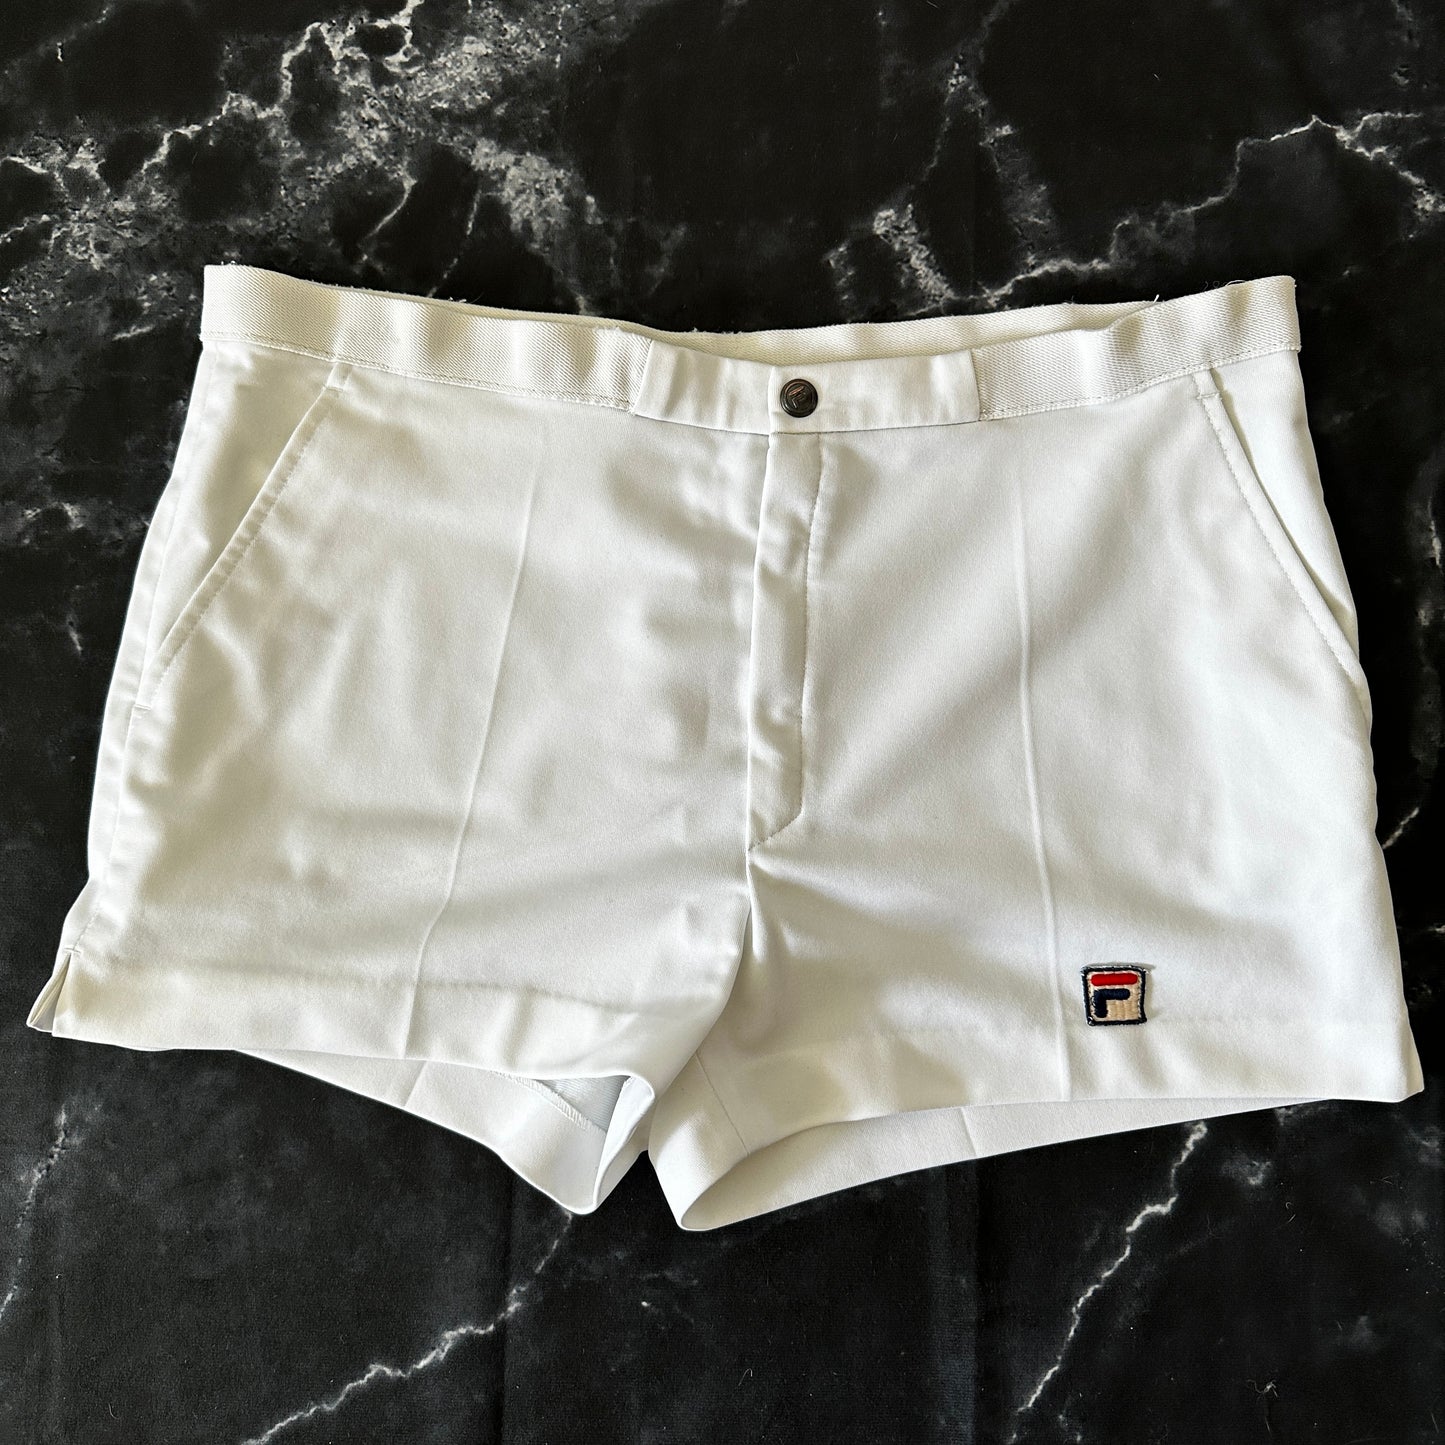 Fila Vintage 80s Tennis Shorts - White - 50 / L - Made in Italy